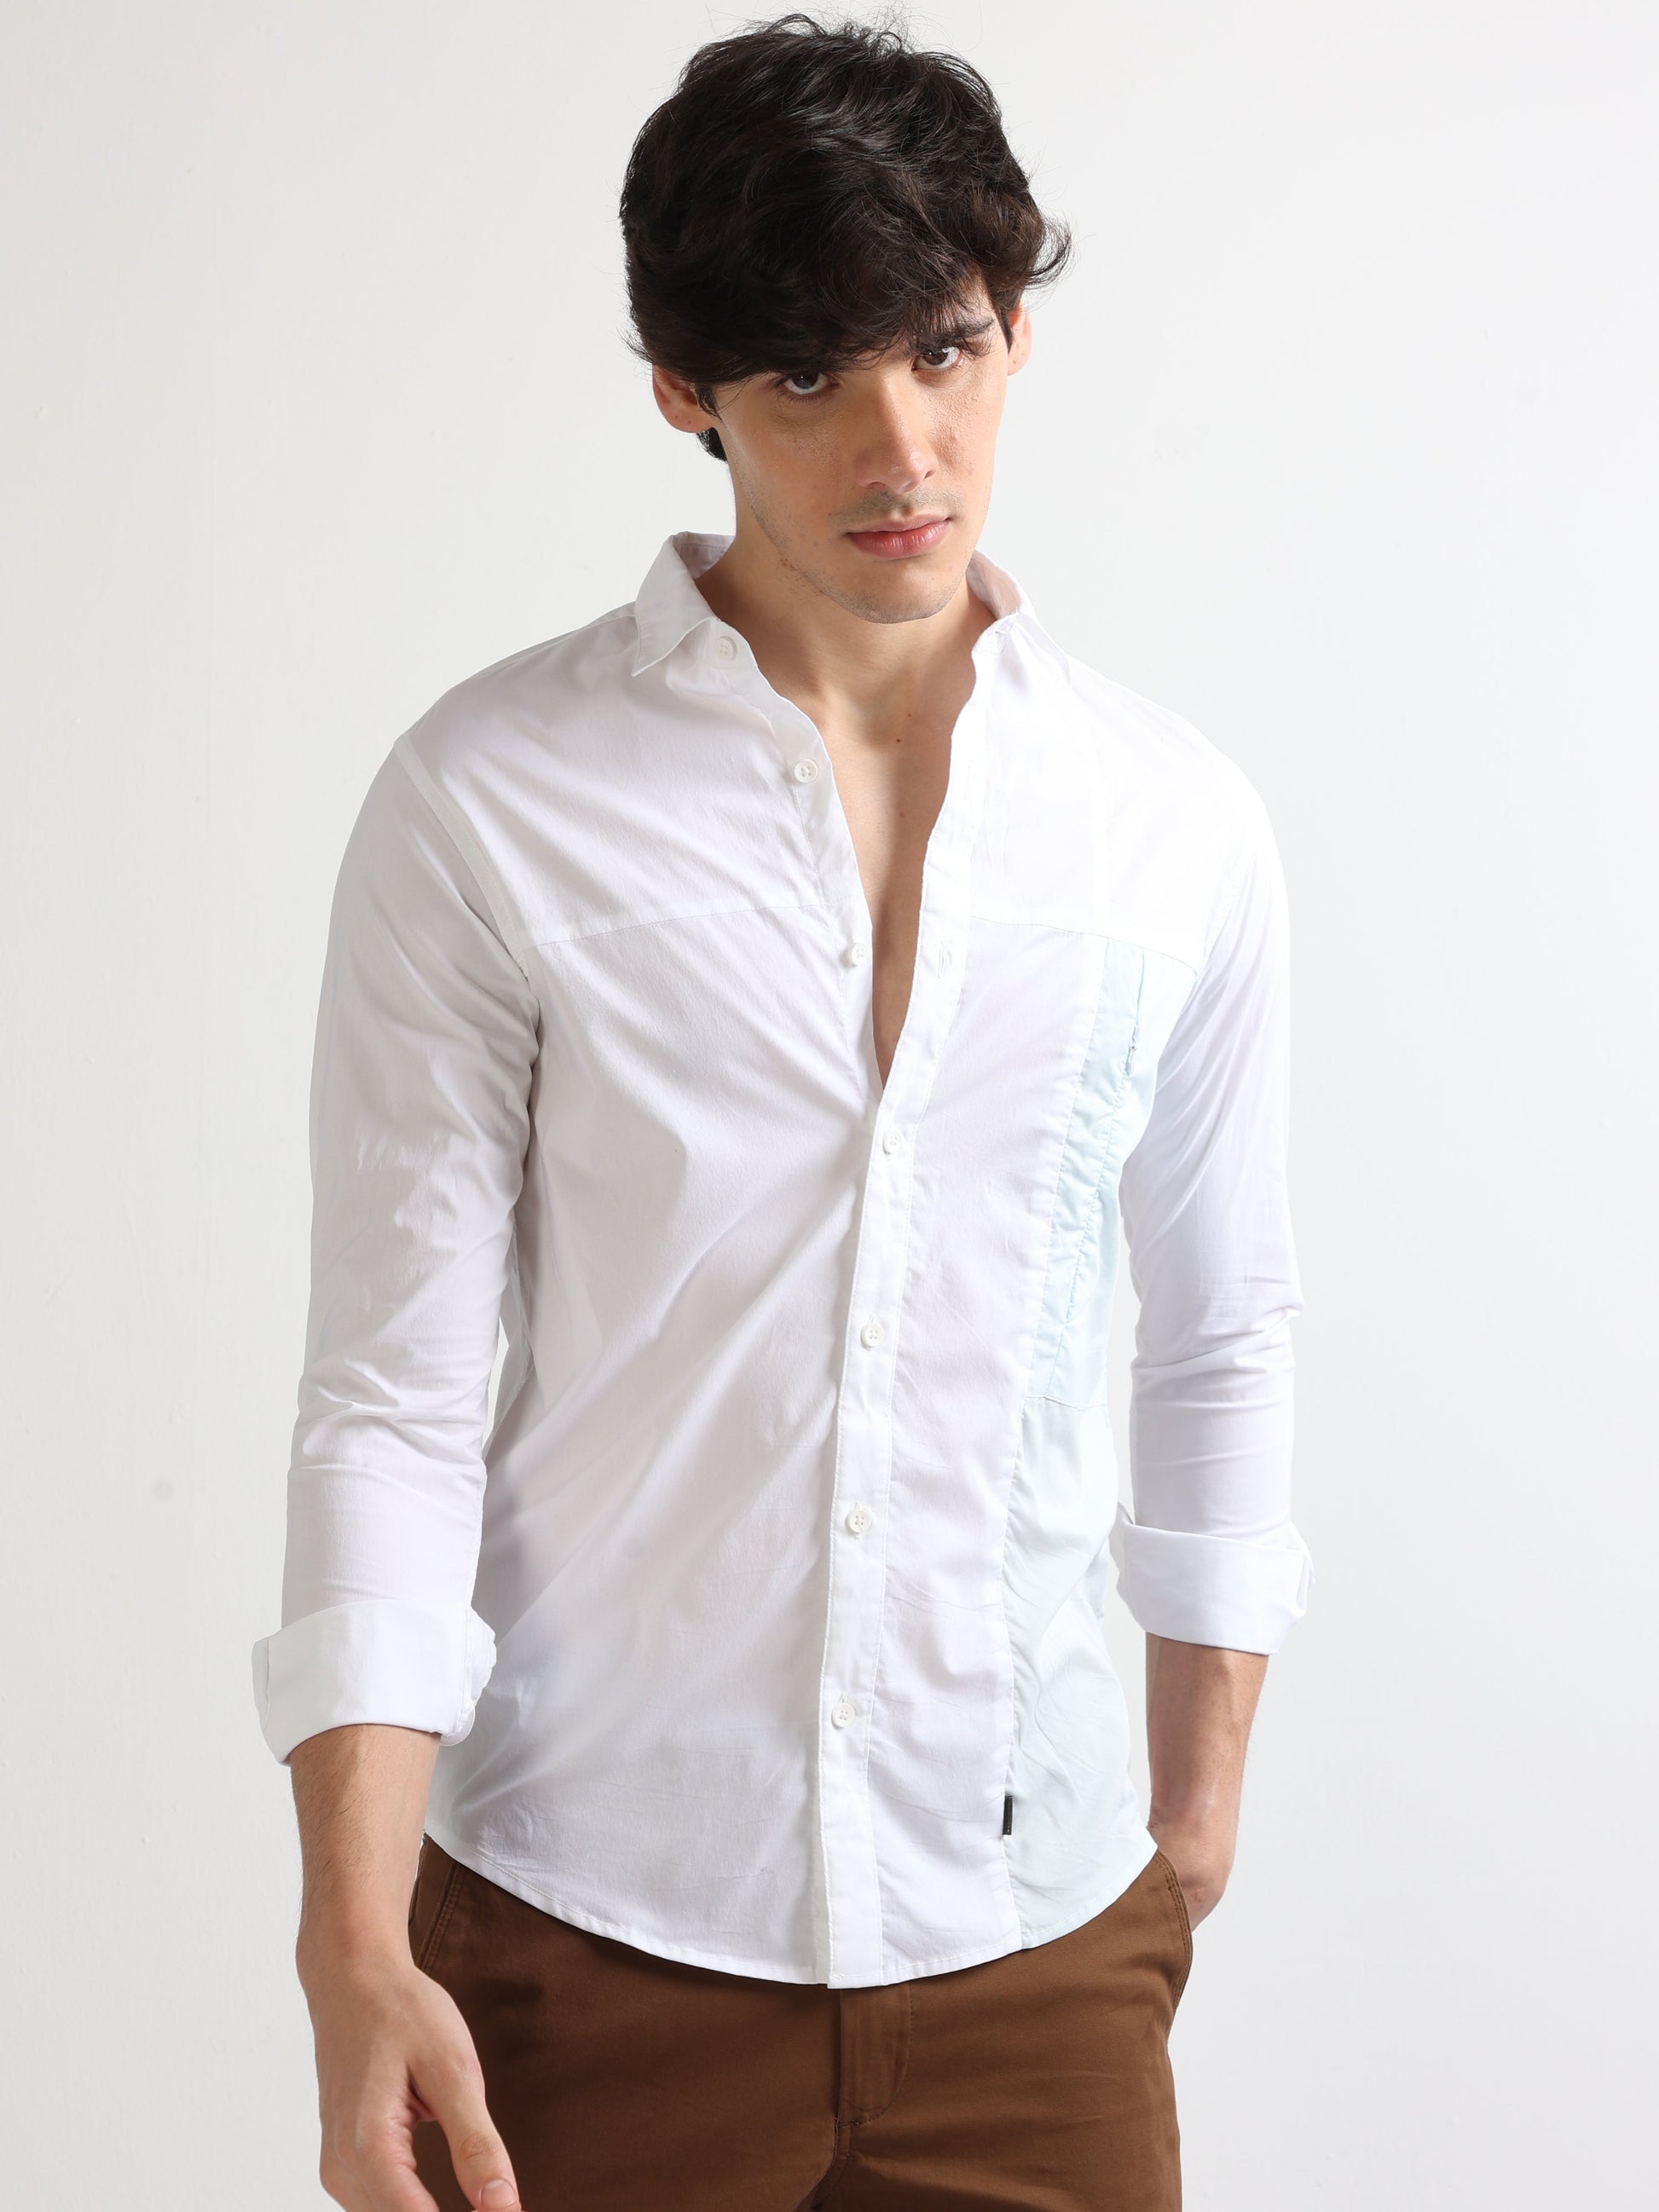 Buy Time Less Side Panel With Stylish Pocket Mens Shirt Online.